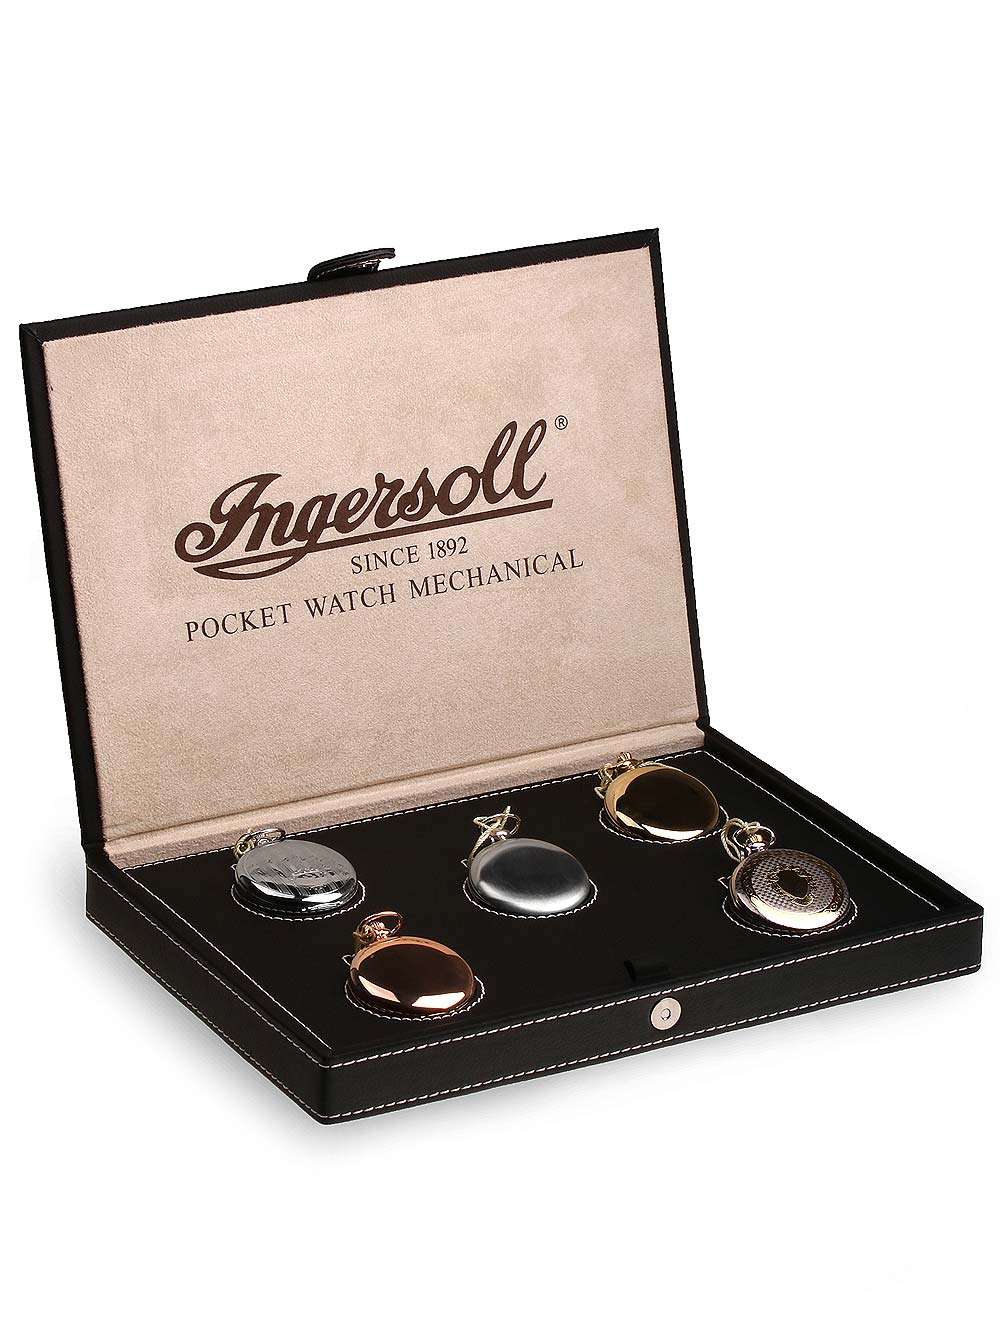 Ingersoll pocket watch collector case (without watch!)